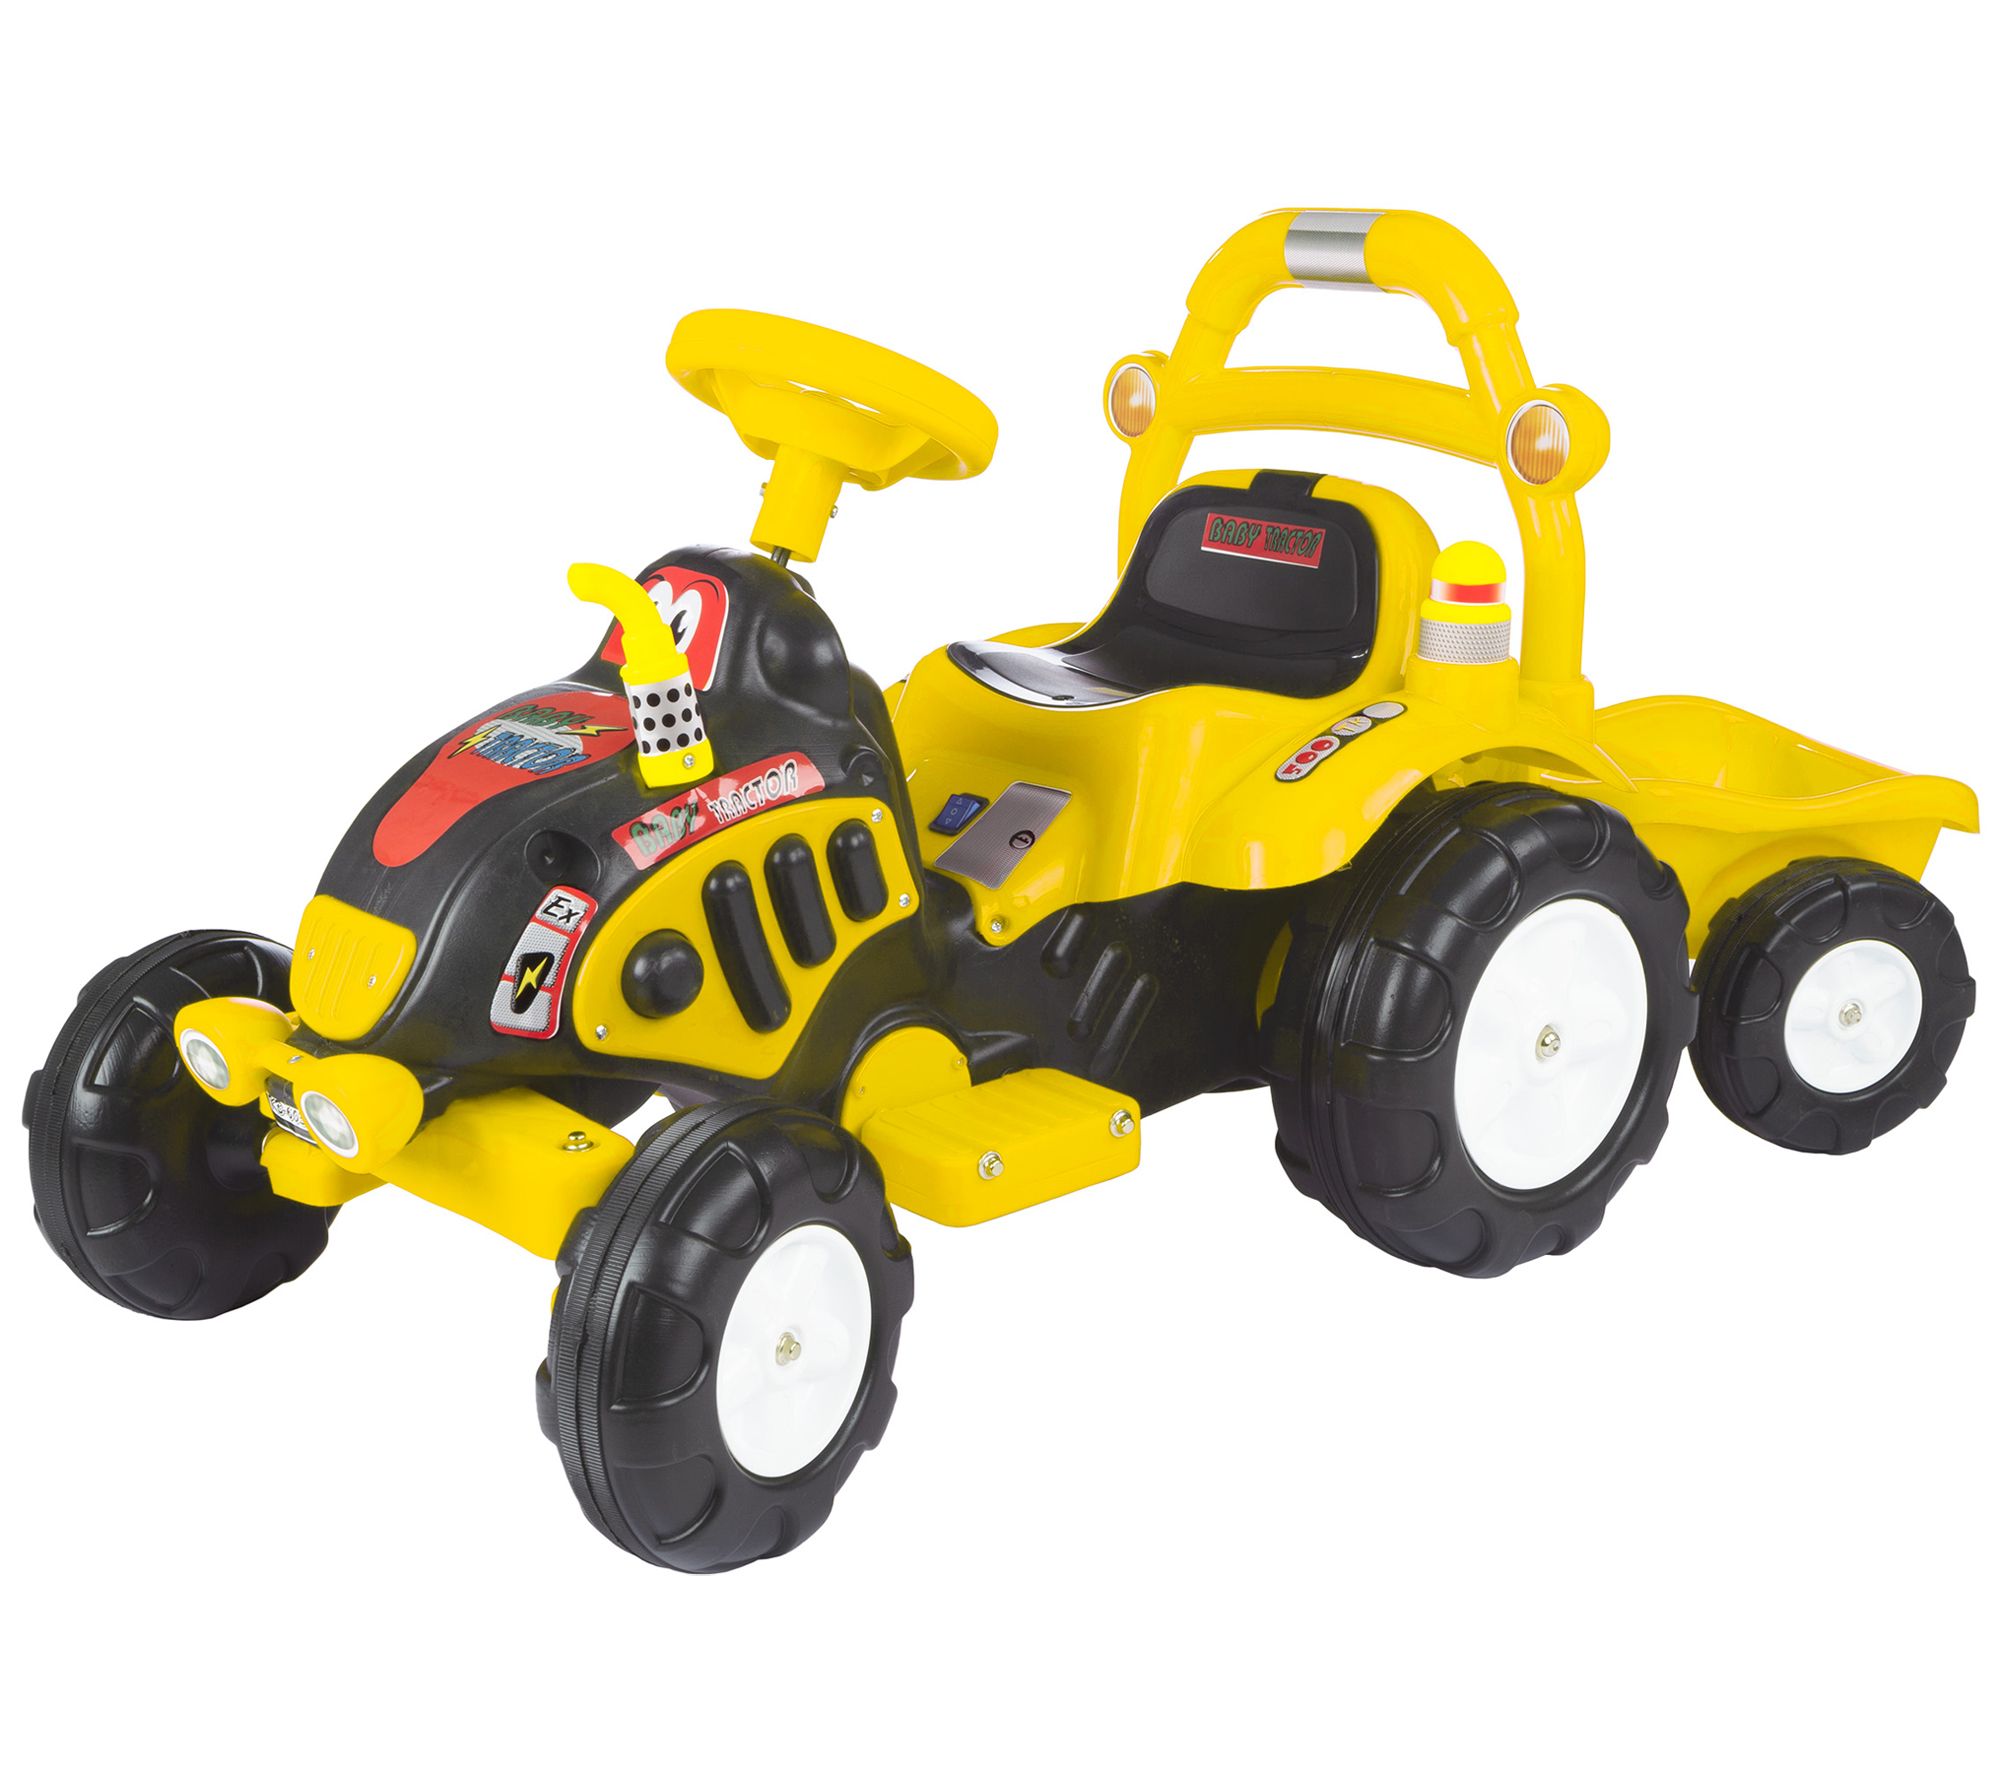 rideable toy tractors